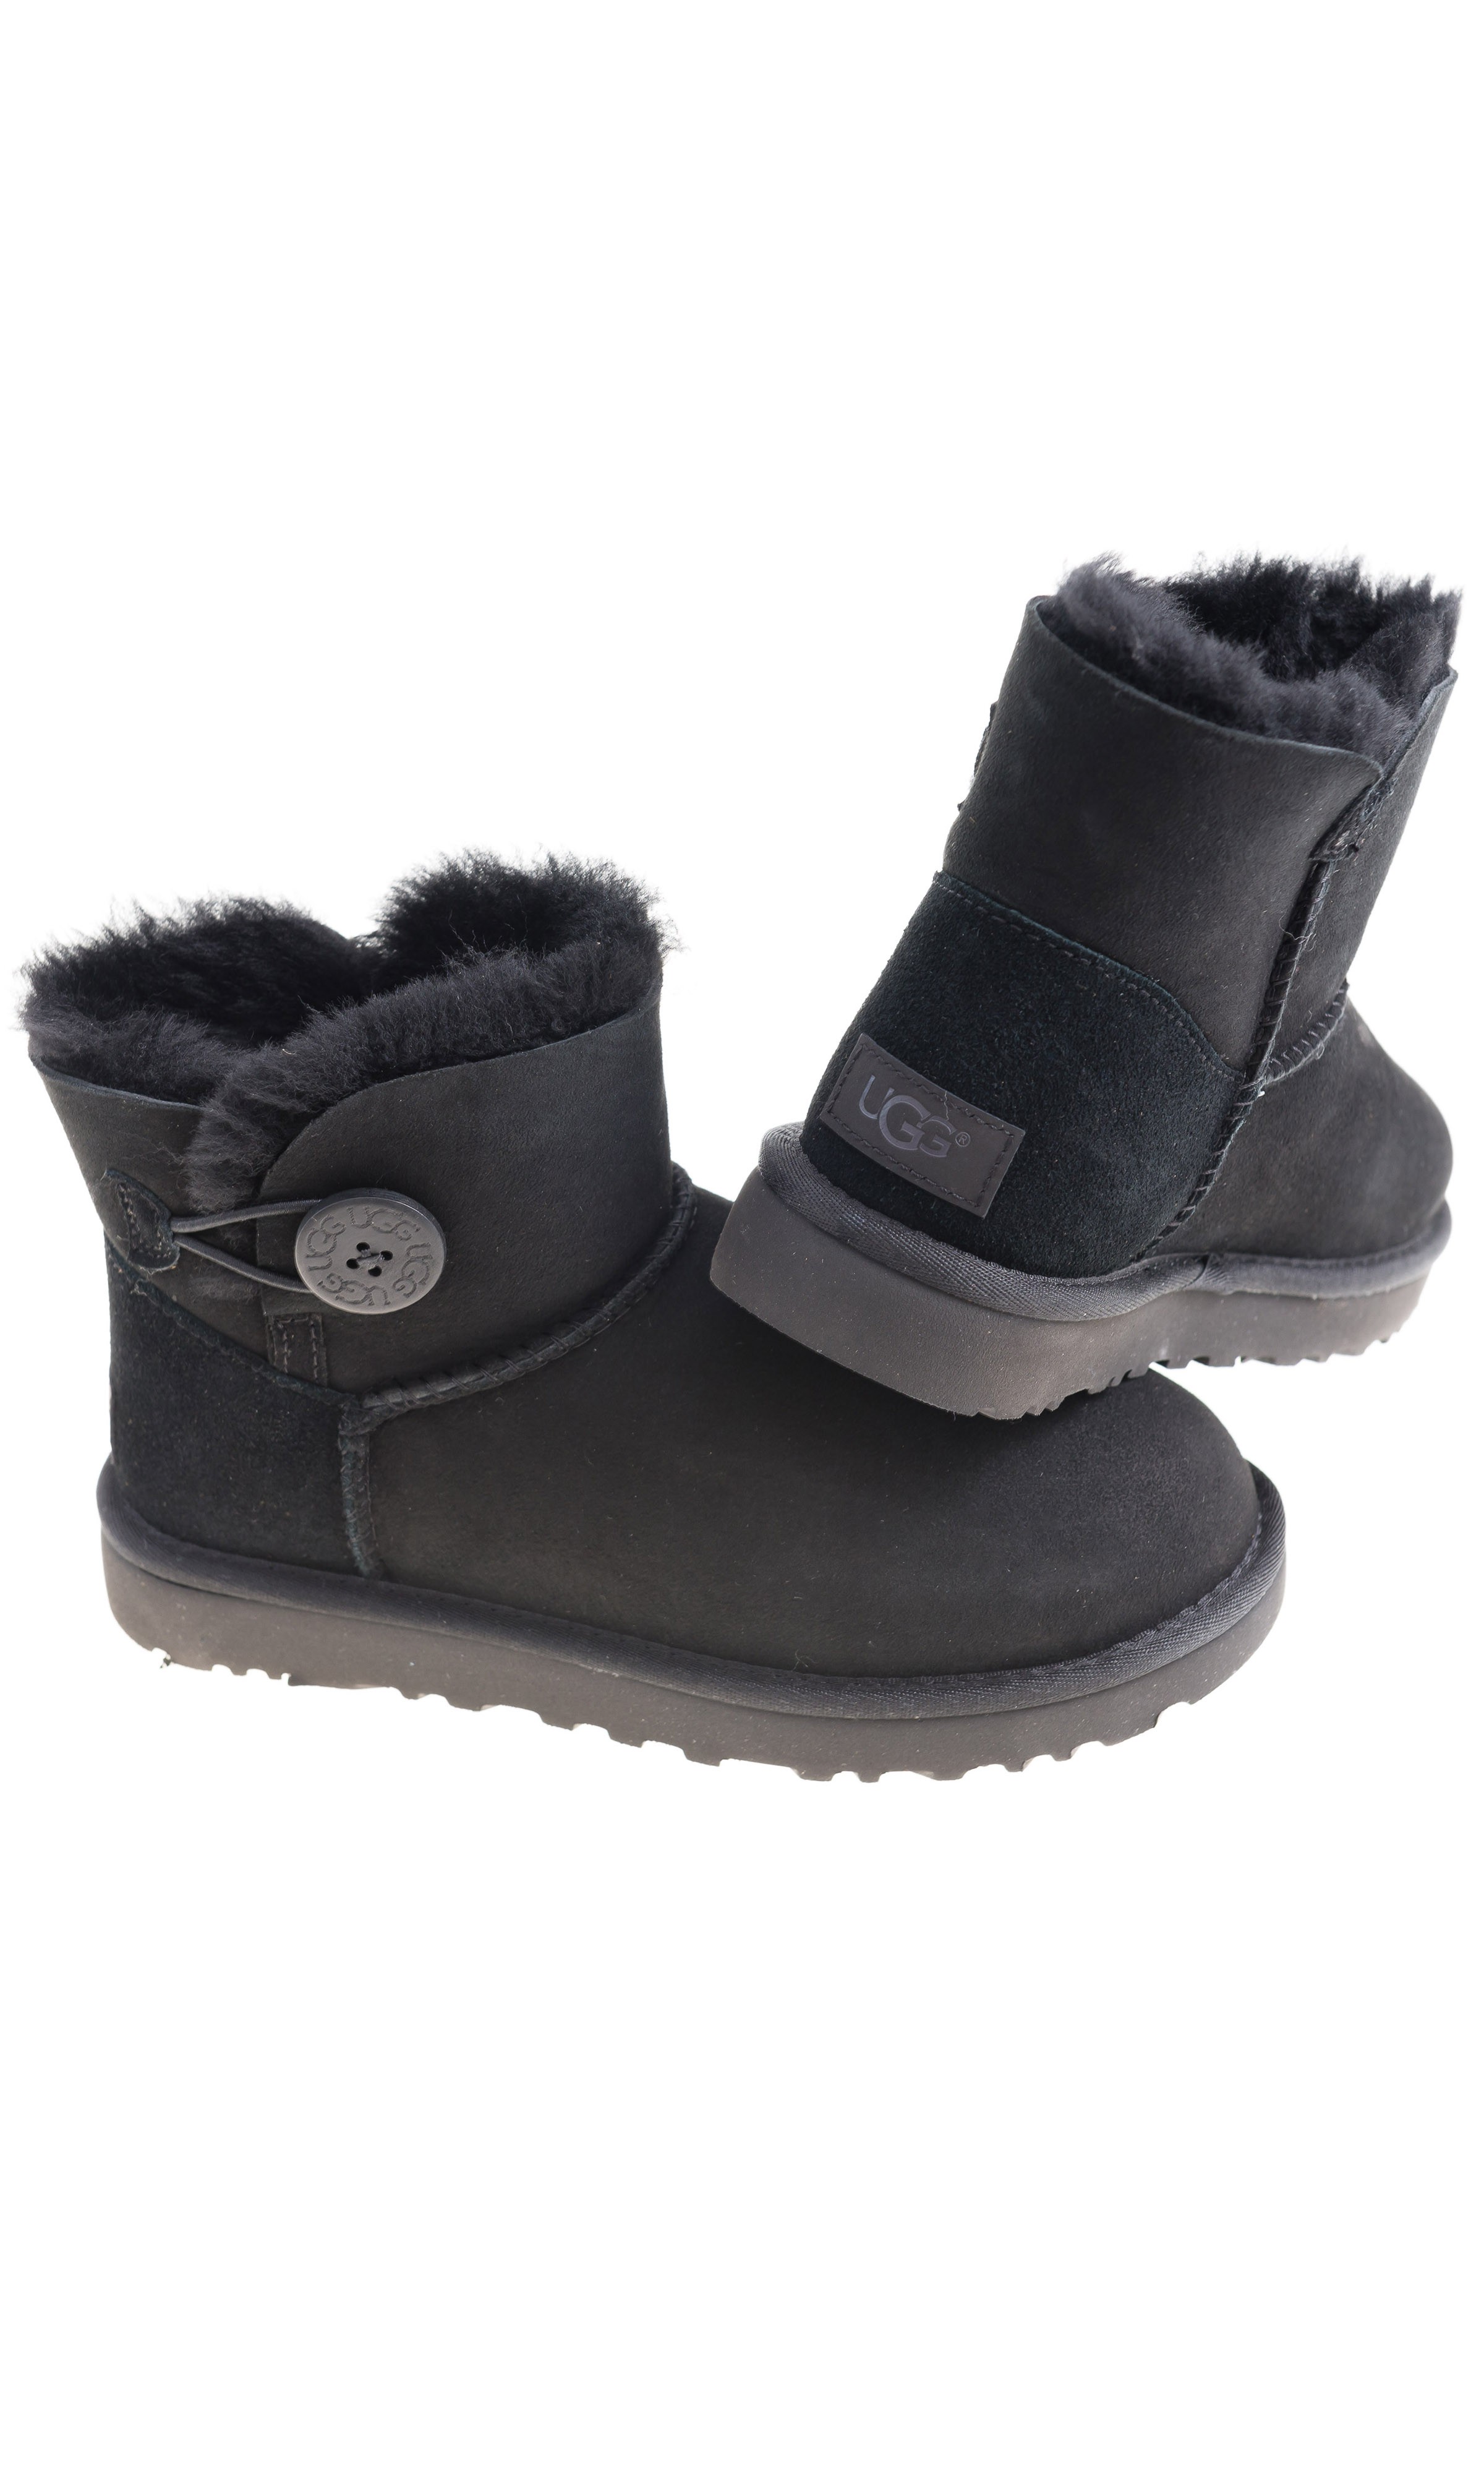 ugg black button boots